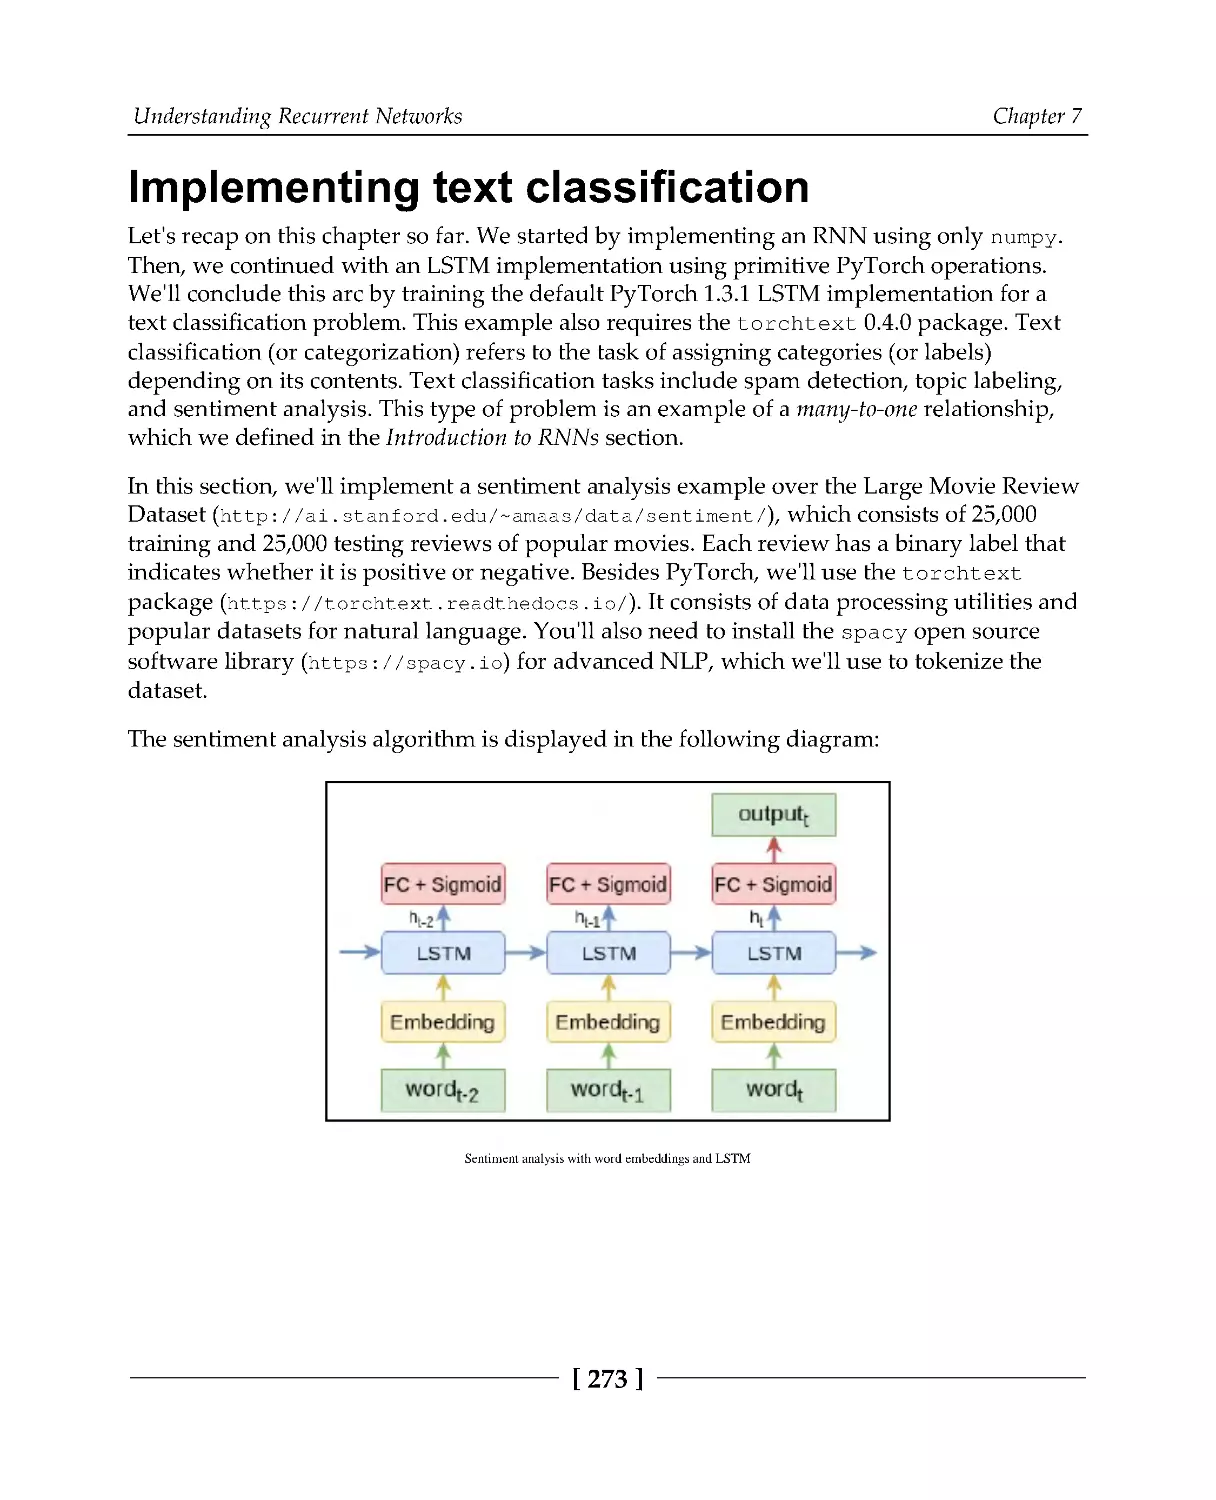 Implementing text classification